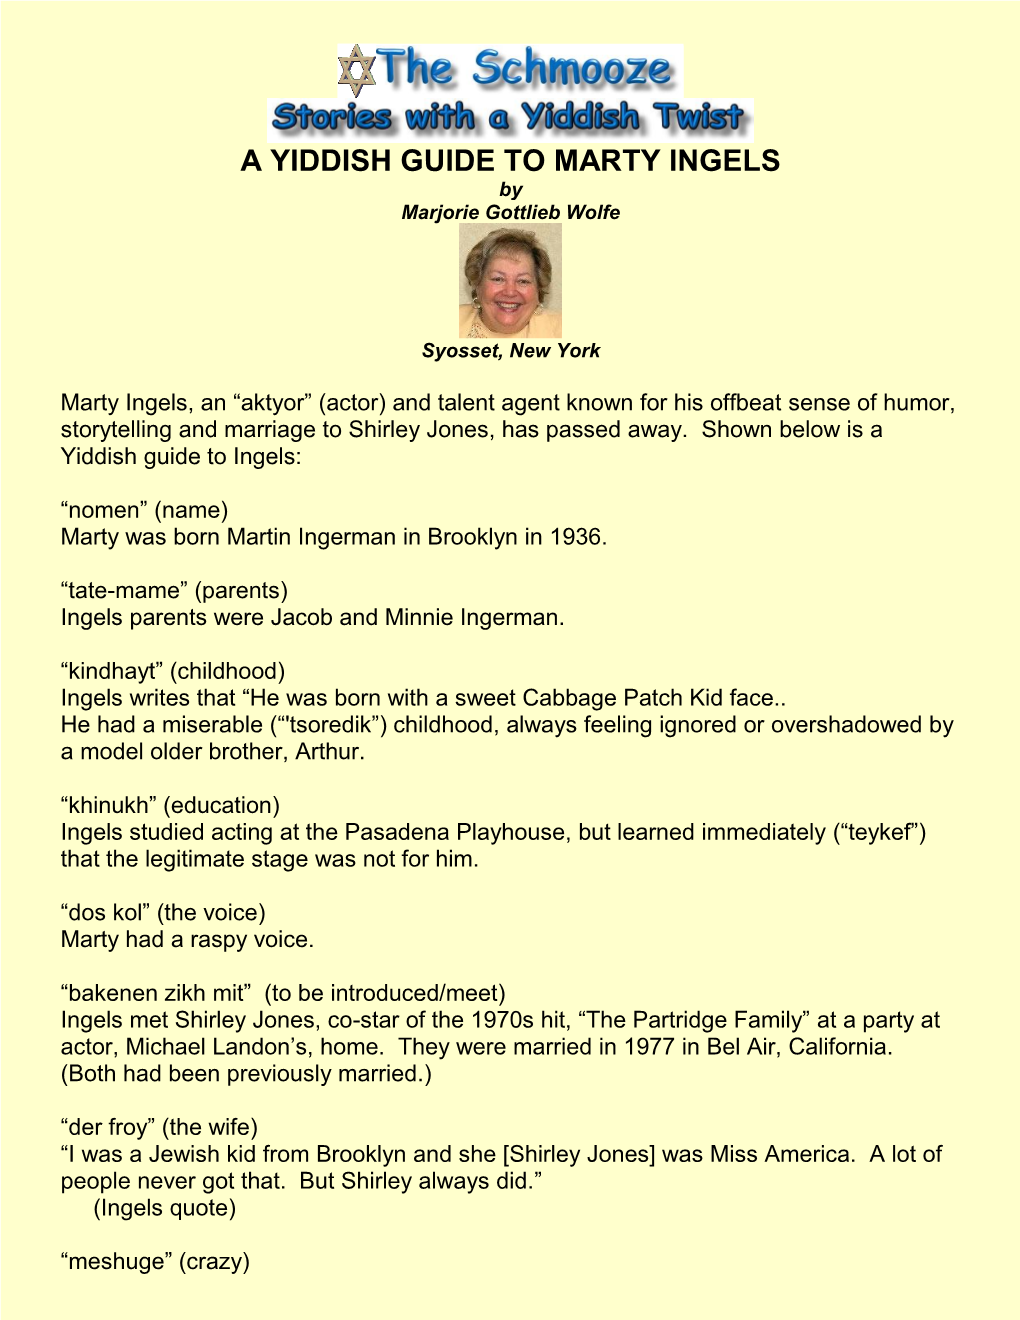 A YIDDISH GUIDE to MARTY INGELS by Marjorie Gottlieb Wolfe